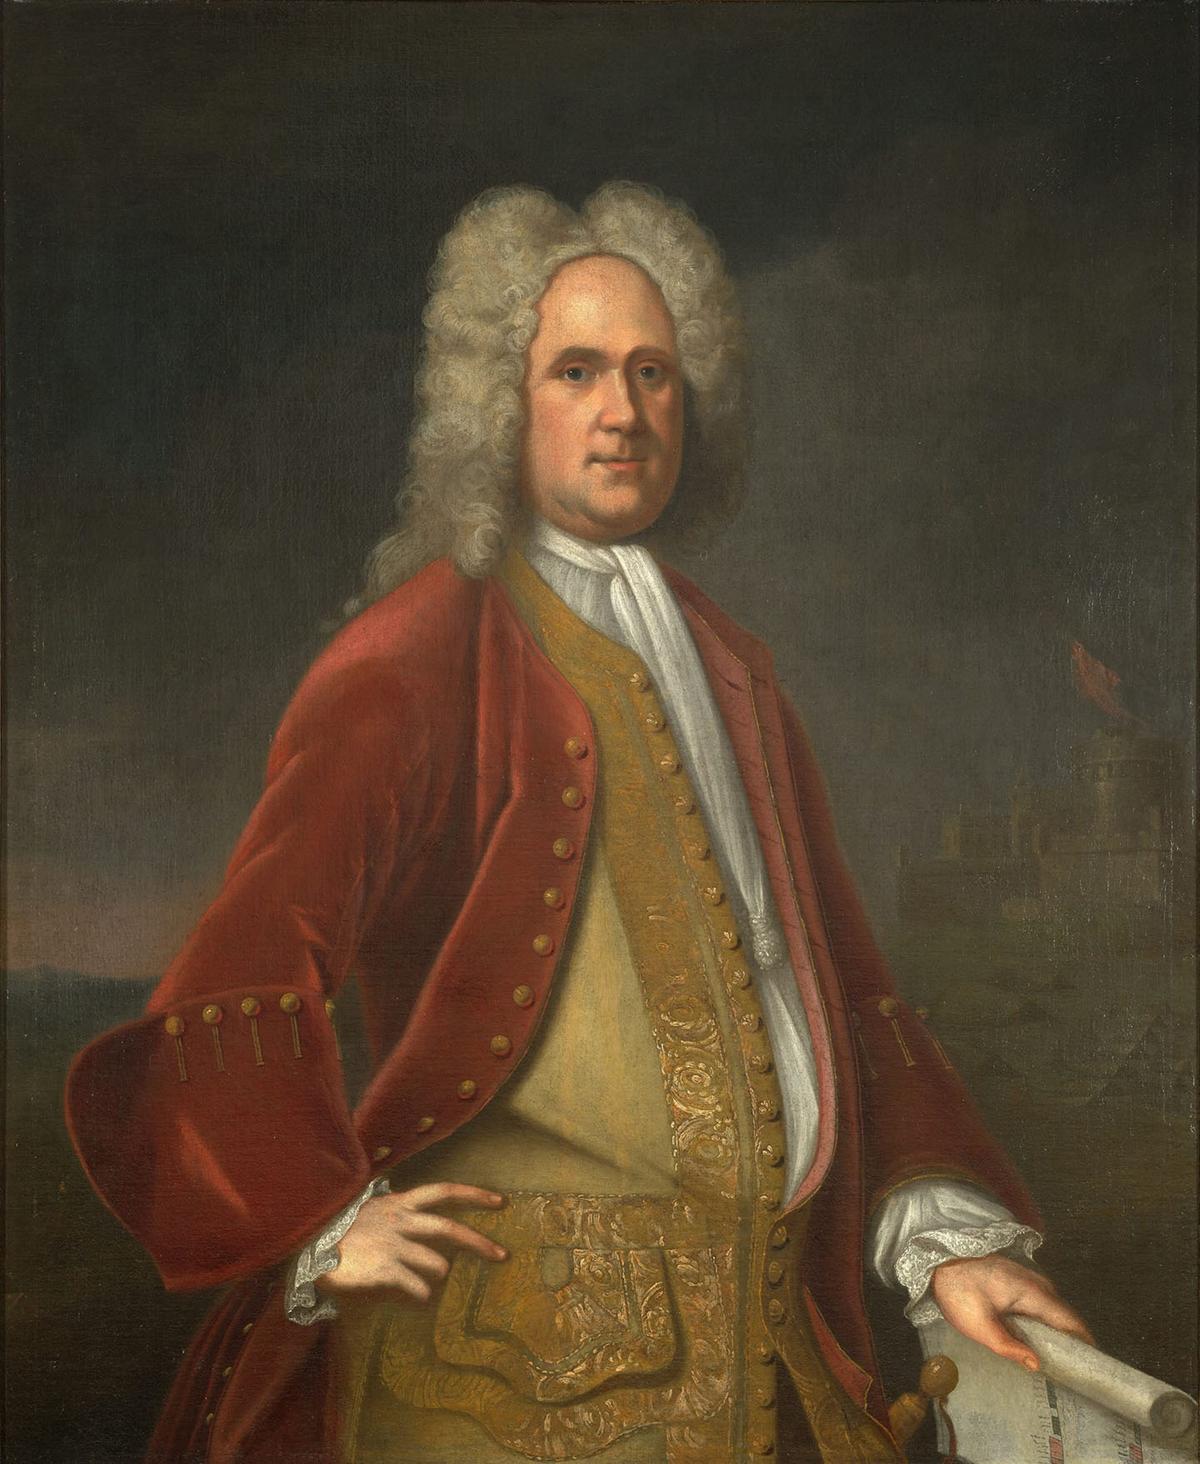 Portrait of Alexander Spotswood, 1736, by Charles Bridges. Oil on canvas. Library of Virginia. (Public Domain)